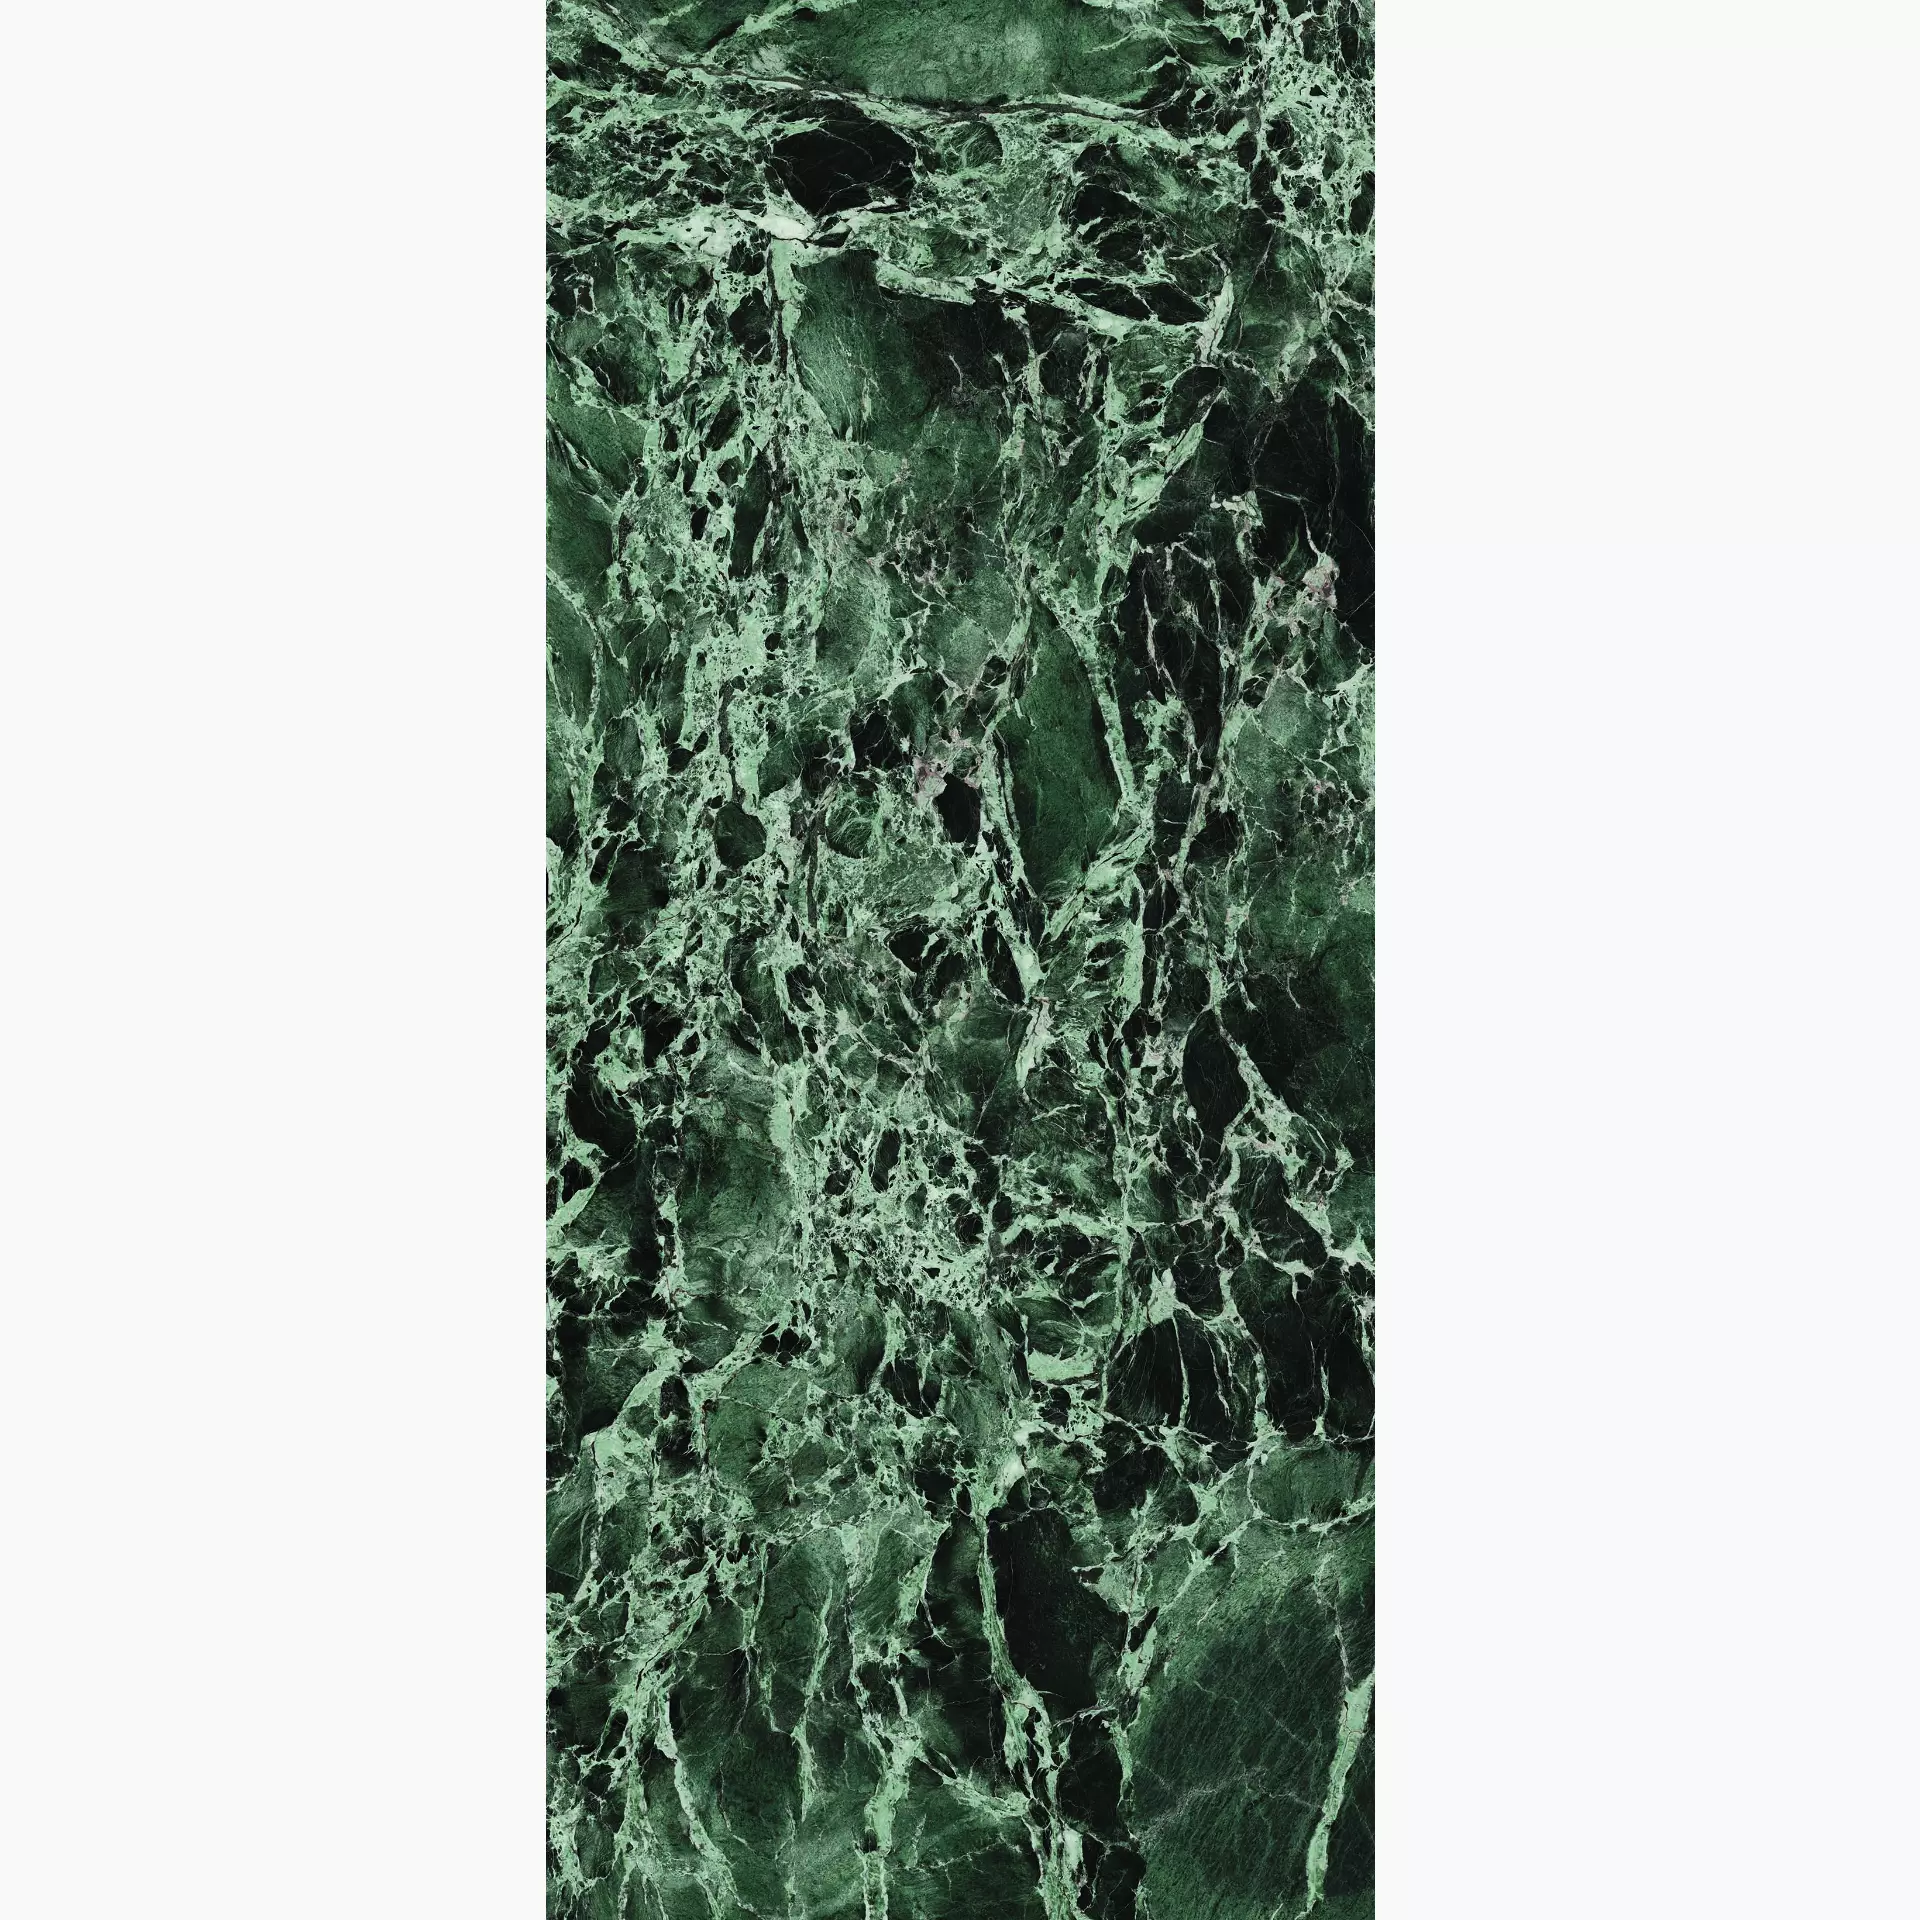 Fondovalle Infinito 2.0 Green Denis Glossy INF2270 120x278cm rectified 6,5mm